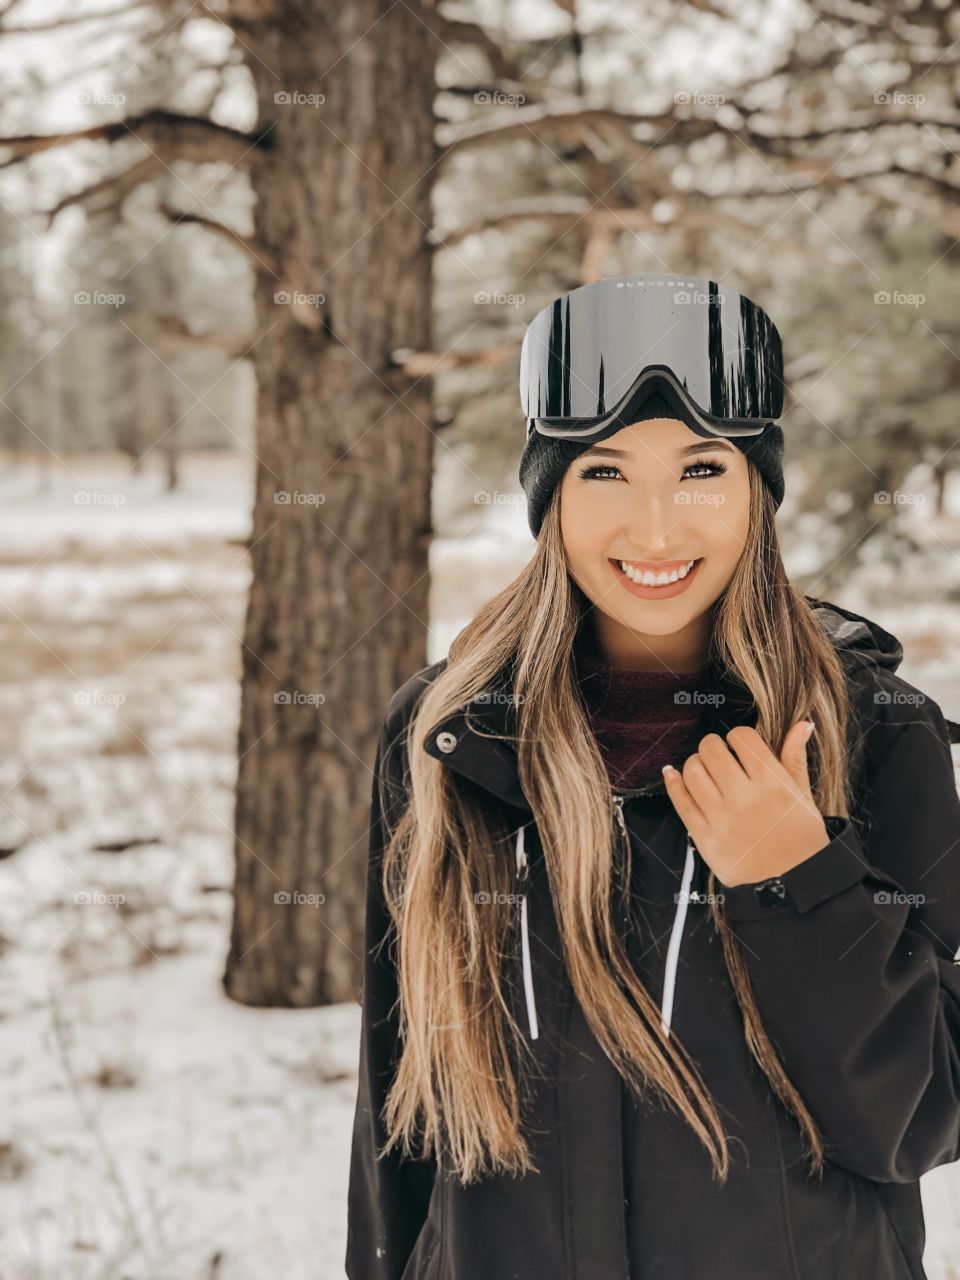 Young girl smiling while snowboarding in the snowy mountains.